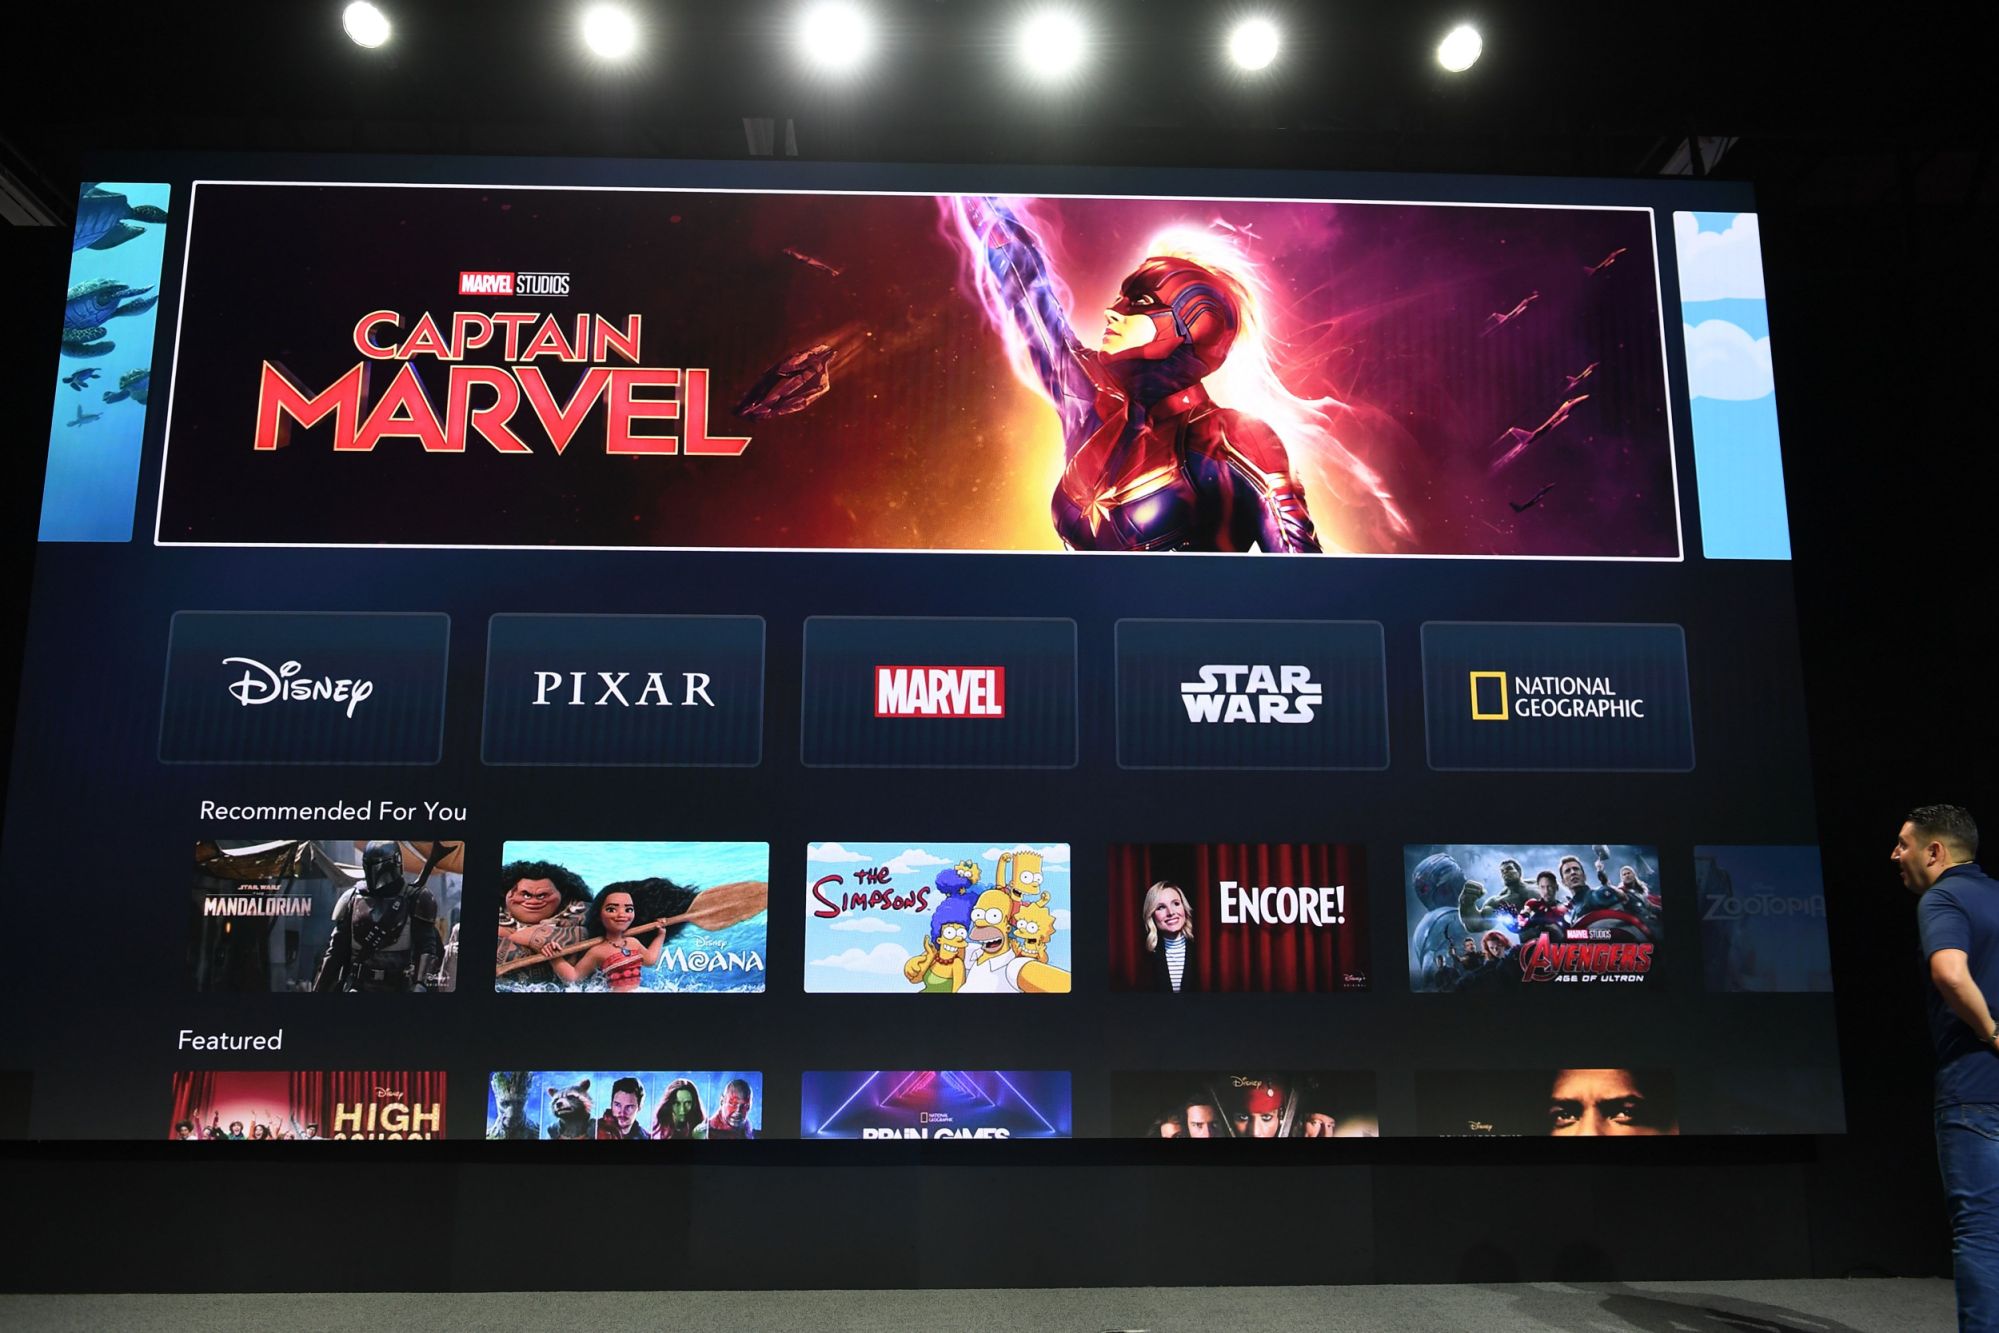 Disney + lets you watch all Marvel movies chronologically